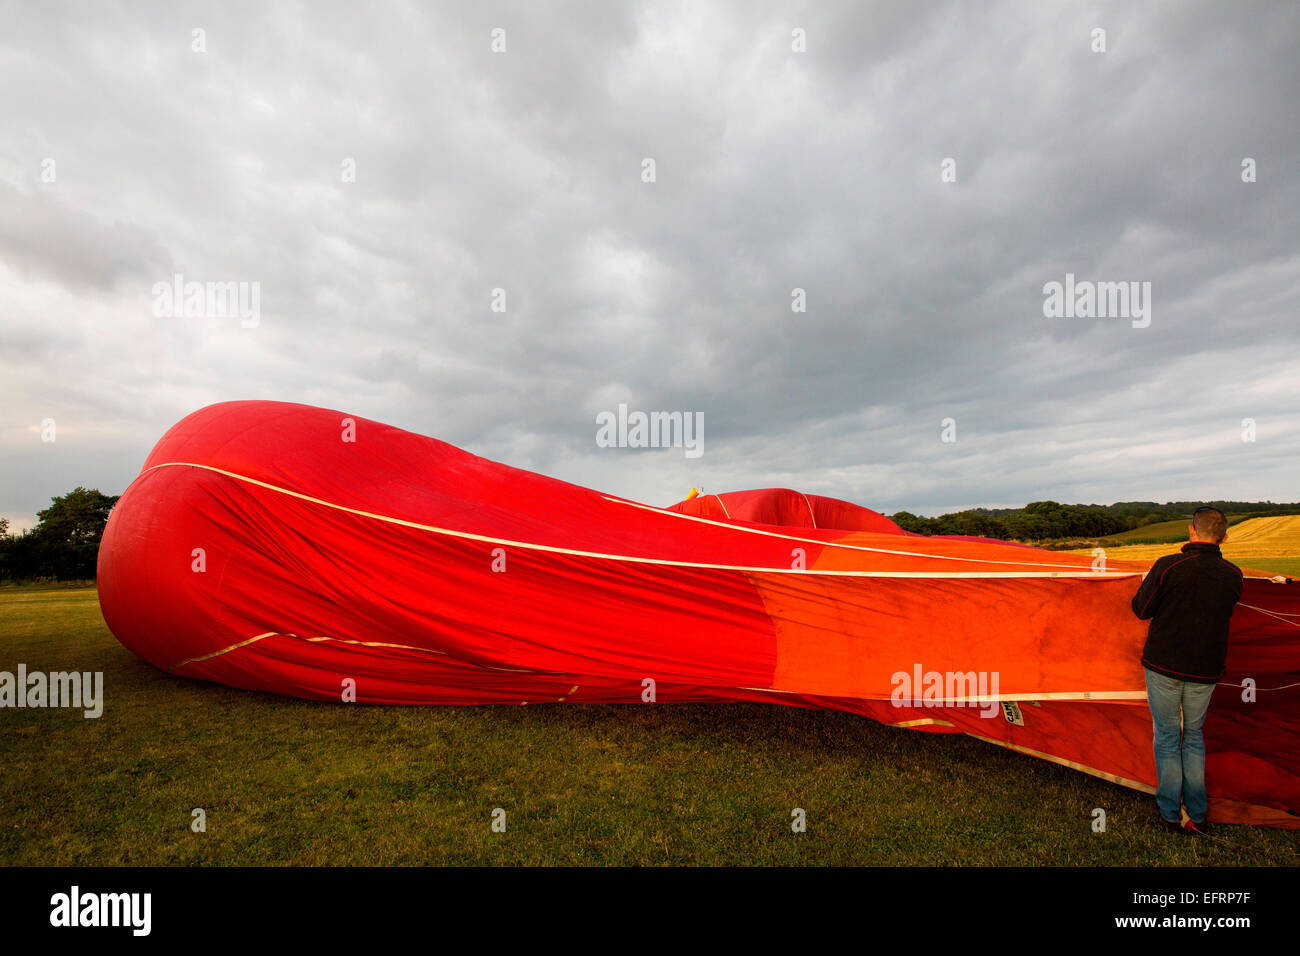 Male balloonist inflating red hot air balloon in field, South Oxfordshire, England Stock Photo